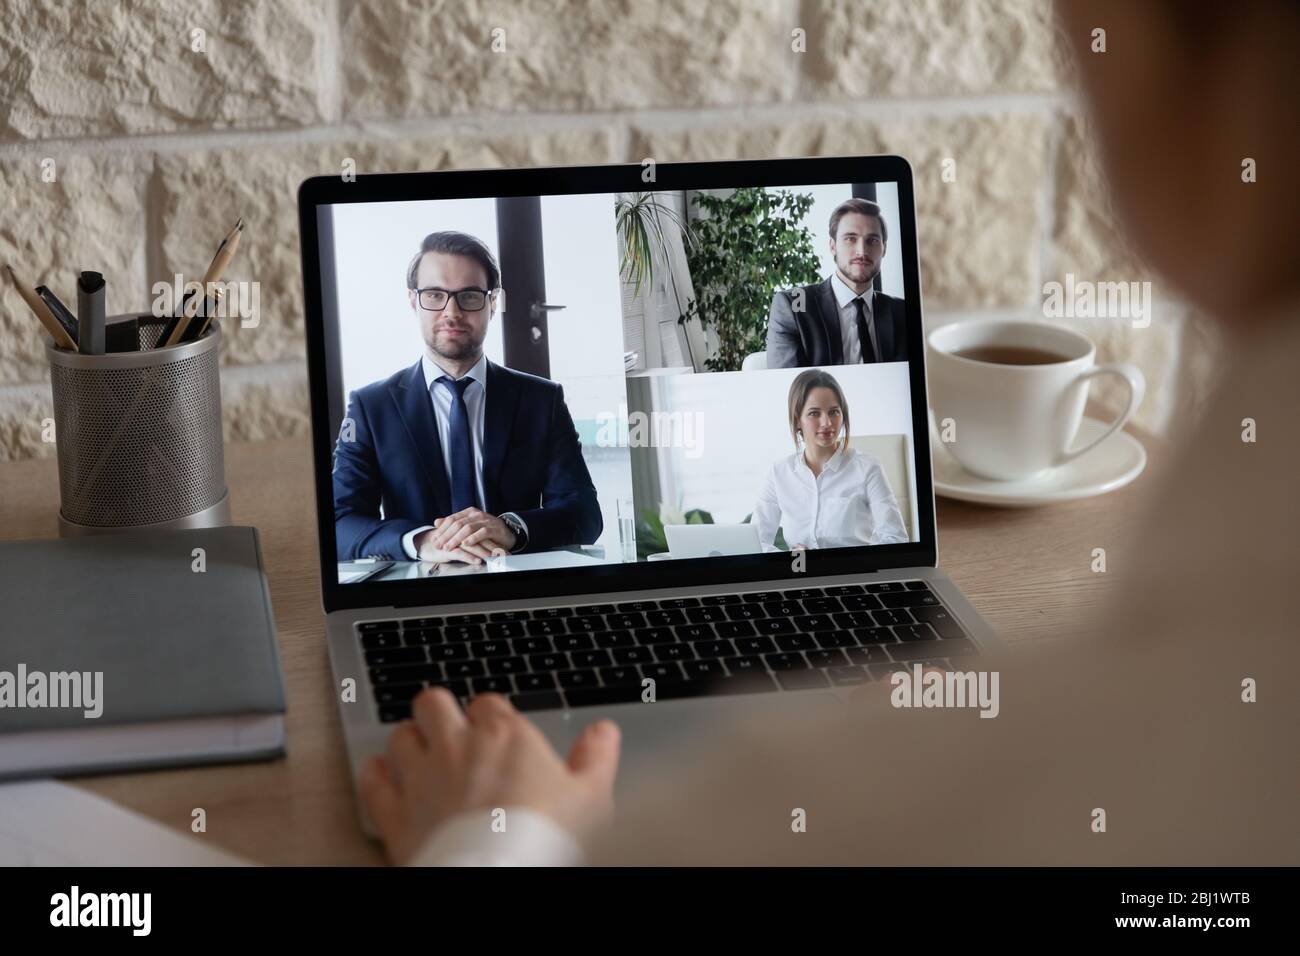 Businesspeople have webcam conference using laptop gadget Stock Photo